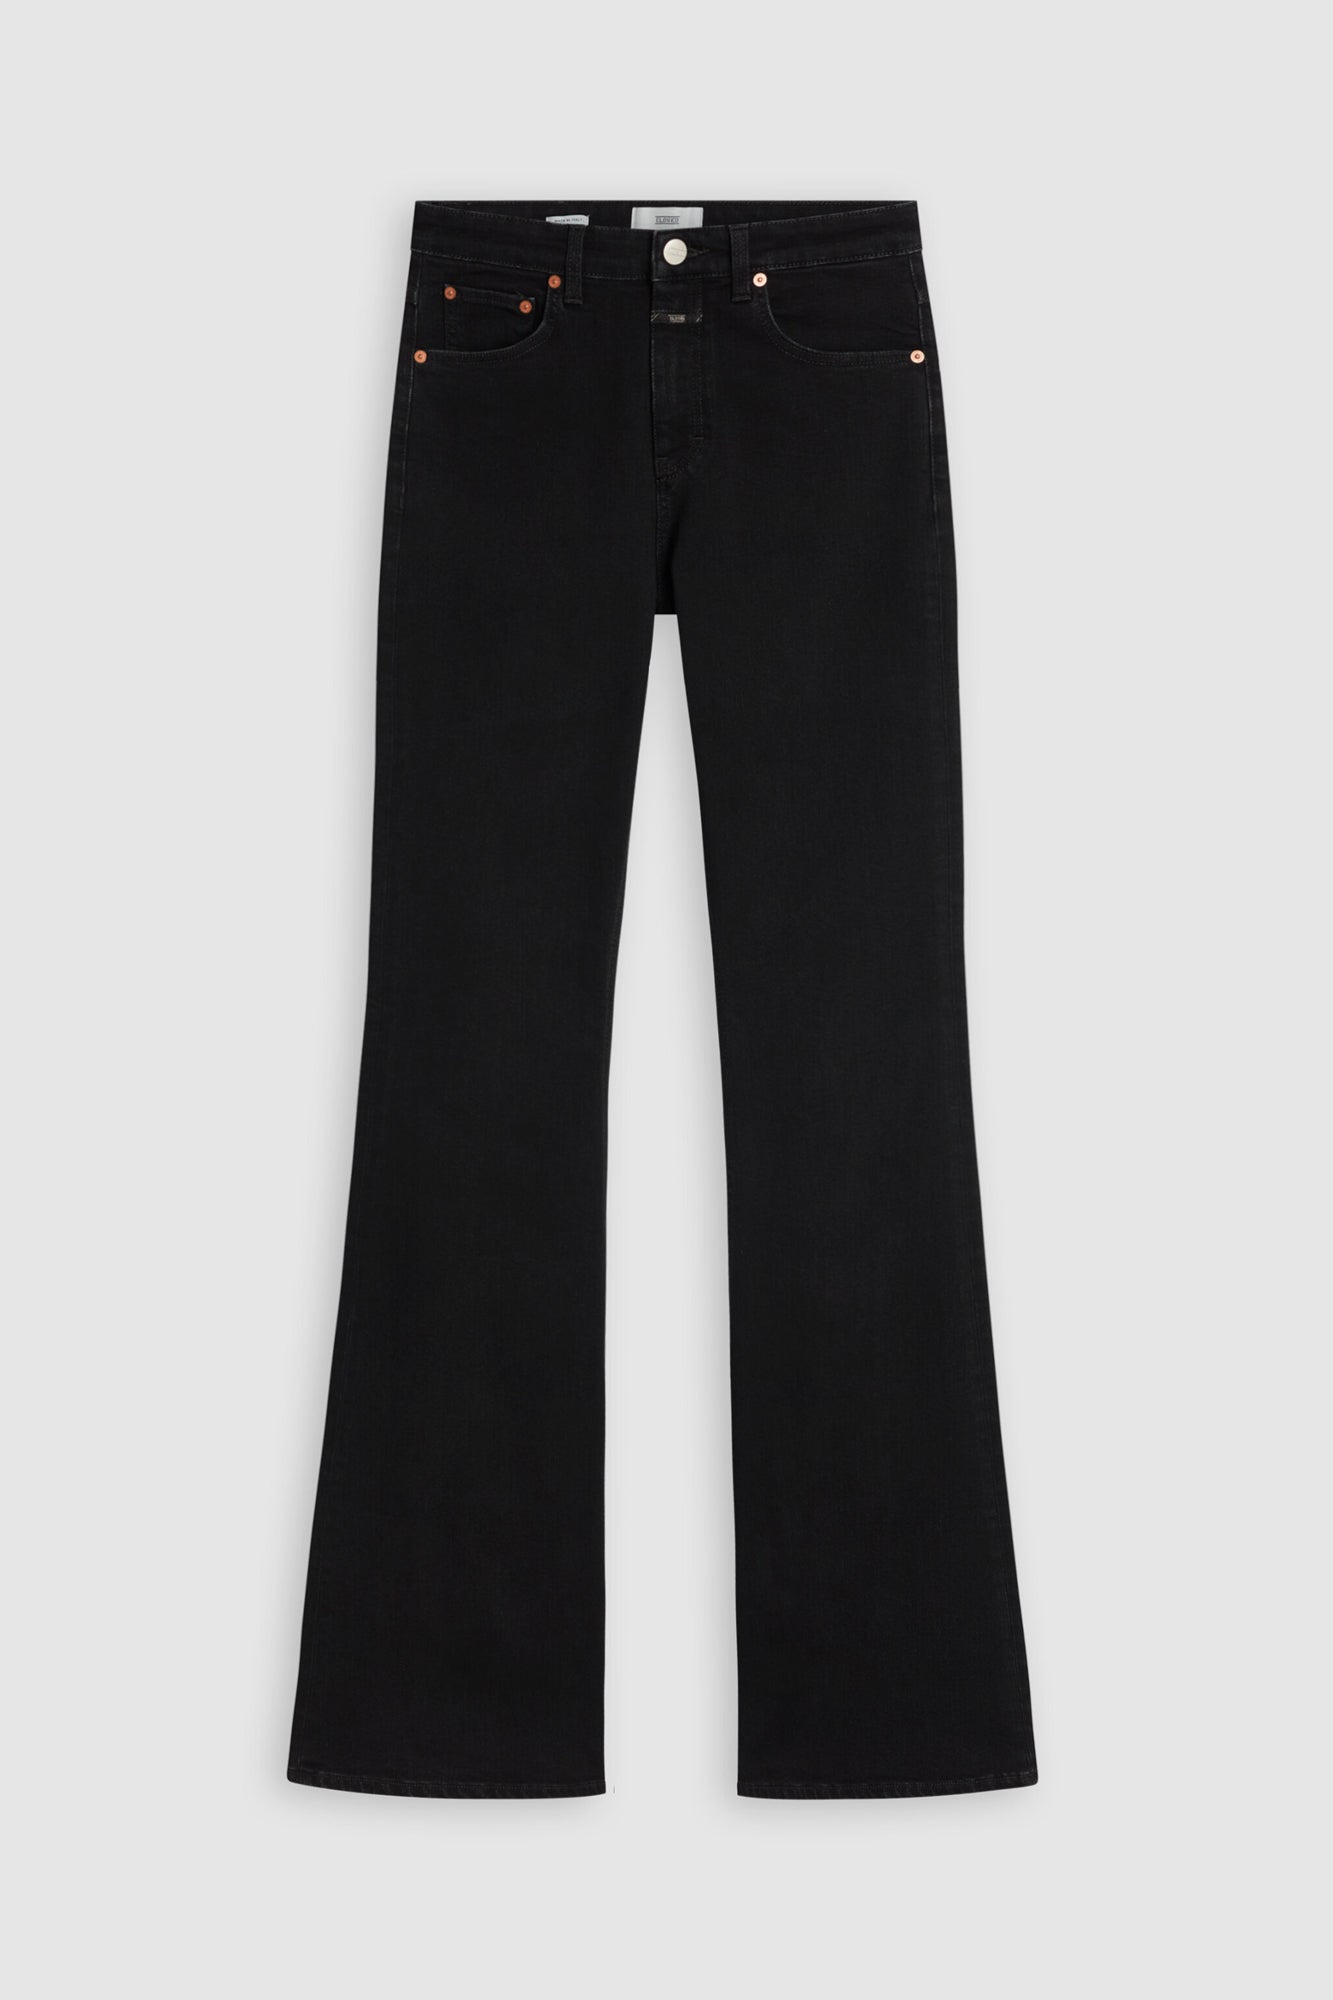 Rawlin Cropped jeans from Closed are part of their BETTER BLUE line, using denim from eco-friendly cotton farms that prioritize fair working conditions for employees. With a skinny fit, high waist and flattering flared leg, these jeans combine sustainability with style.